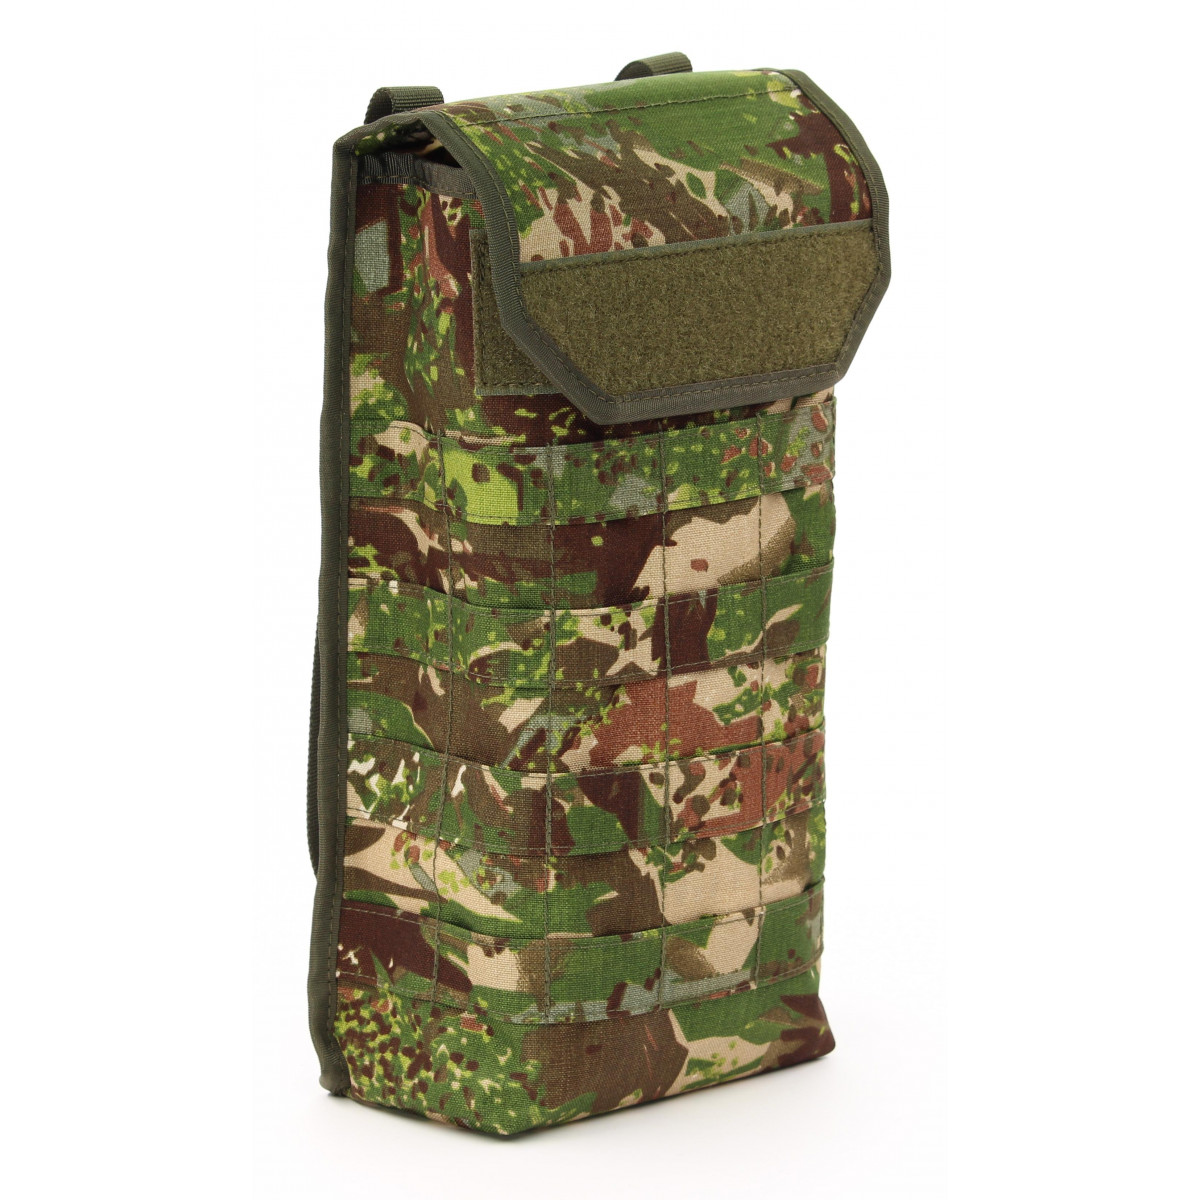 Hydrations Carrier 2 liters Molle pouch for water bladders color Concamo (3593)